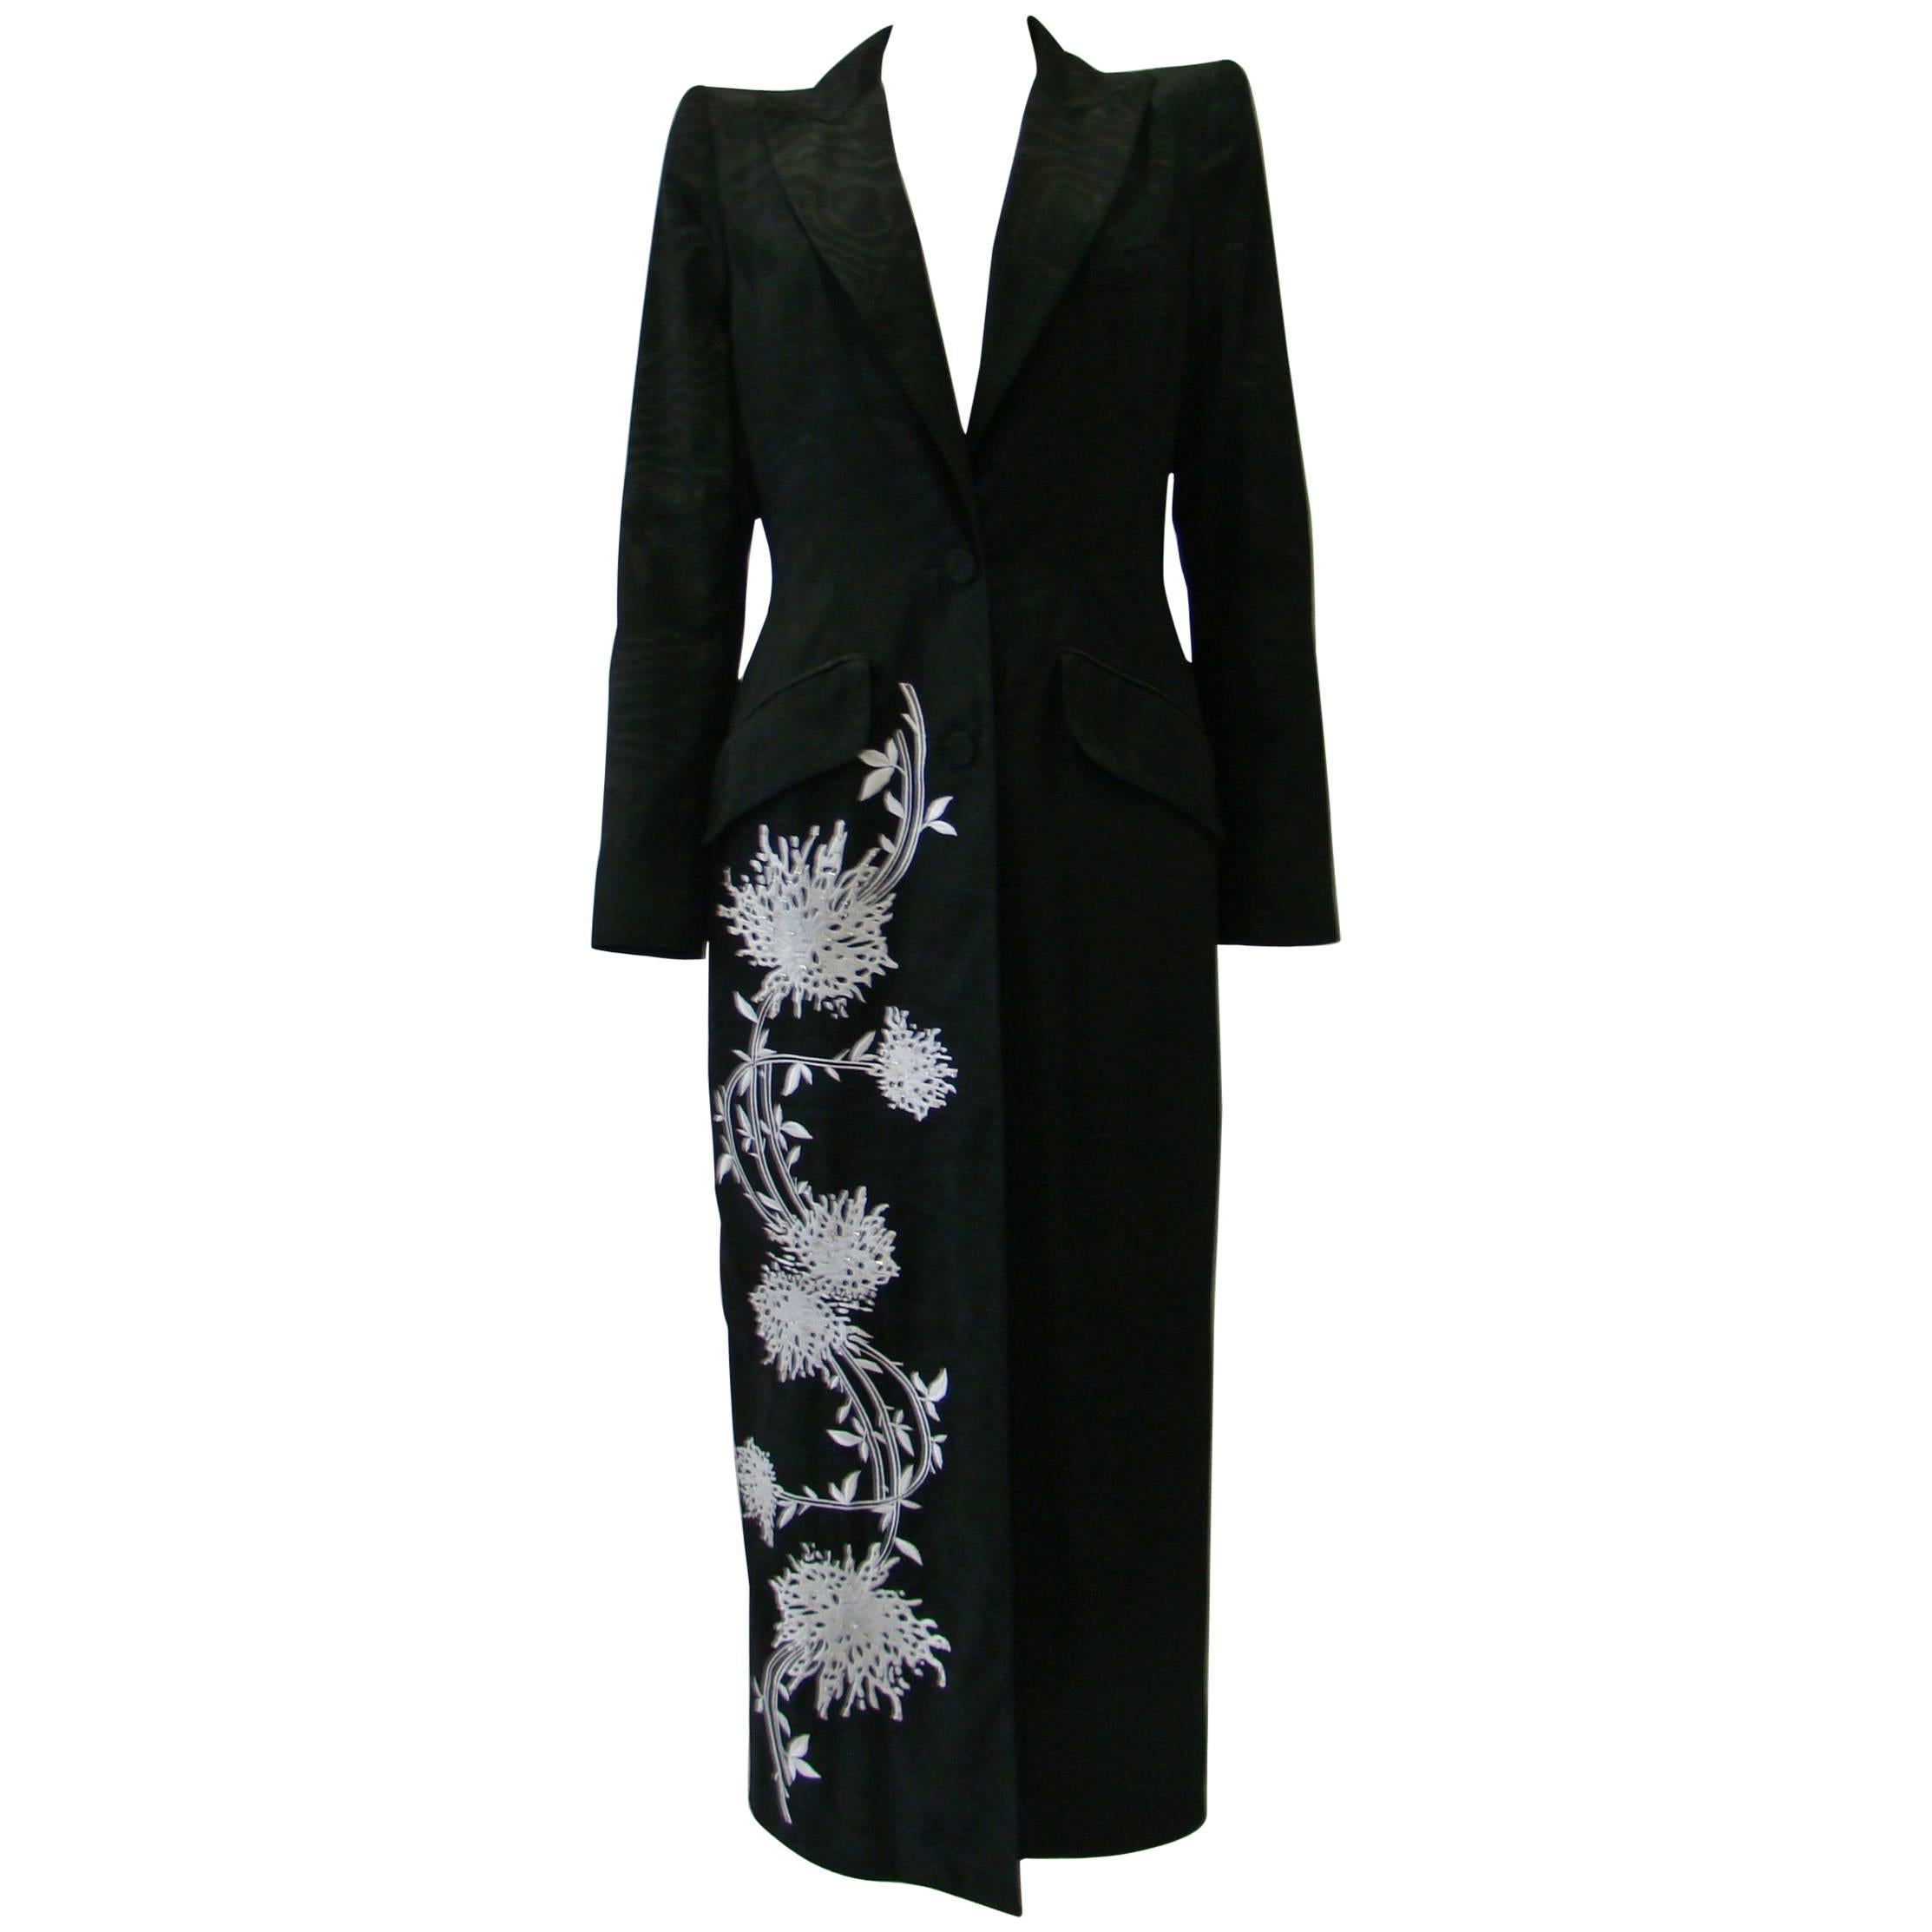 Angelo Mozzillo Embroidered Evening Frock Coat, Fall 1998 For Sale